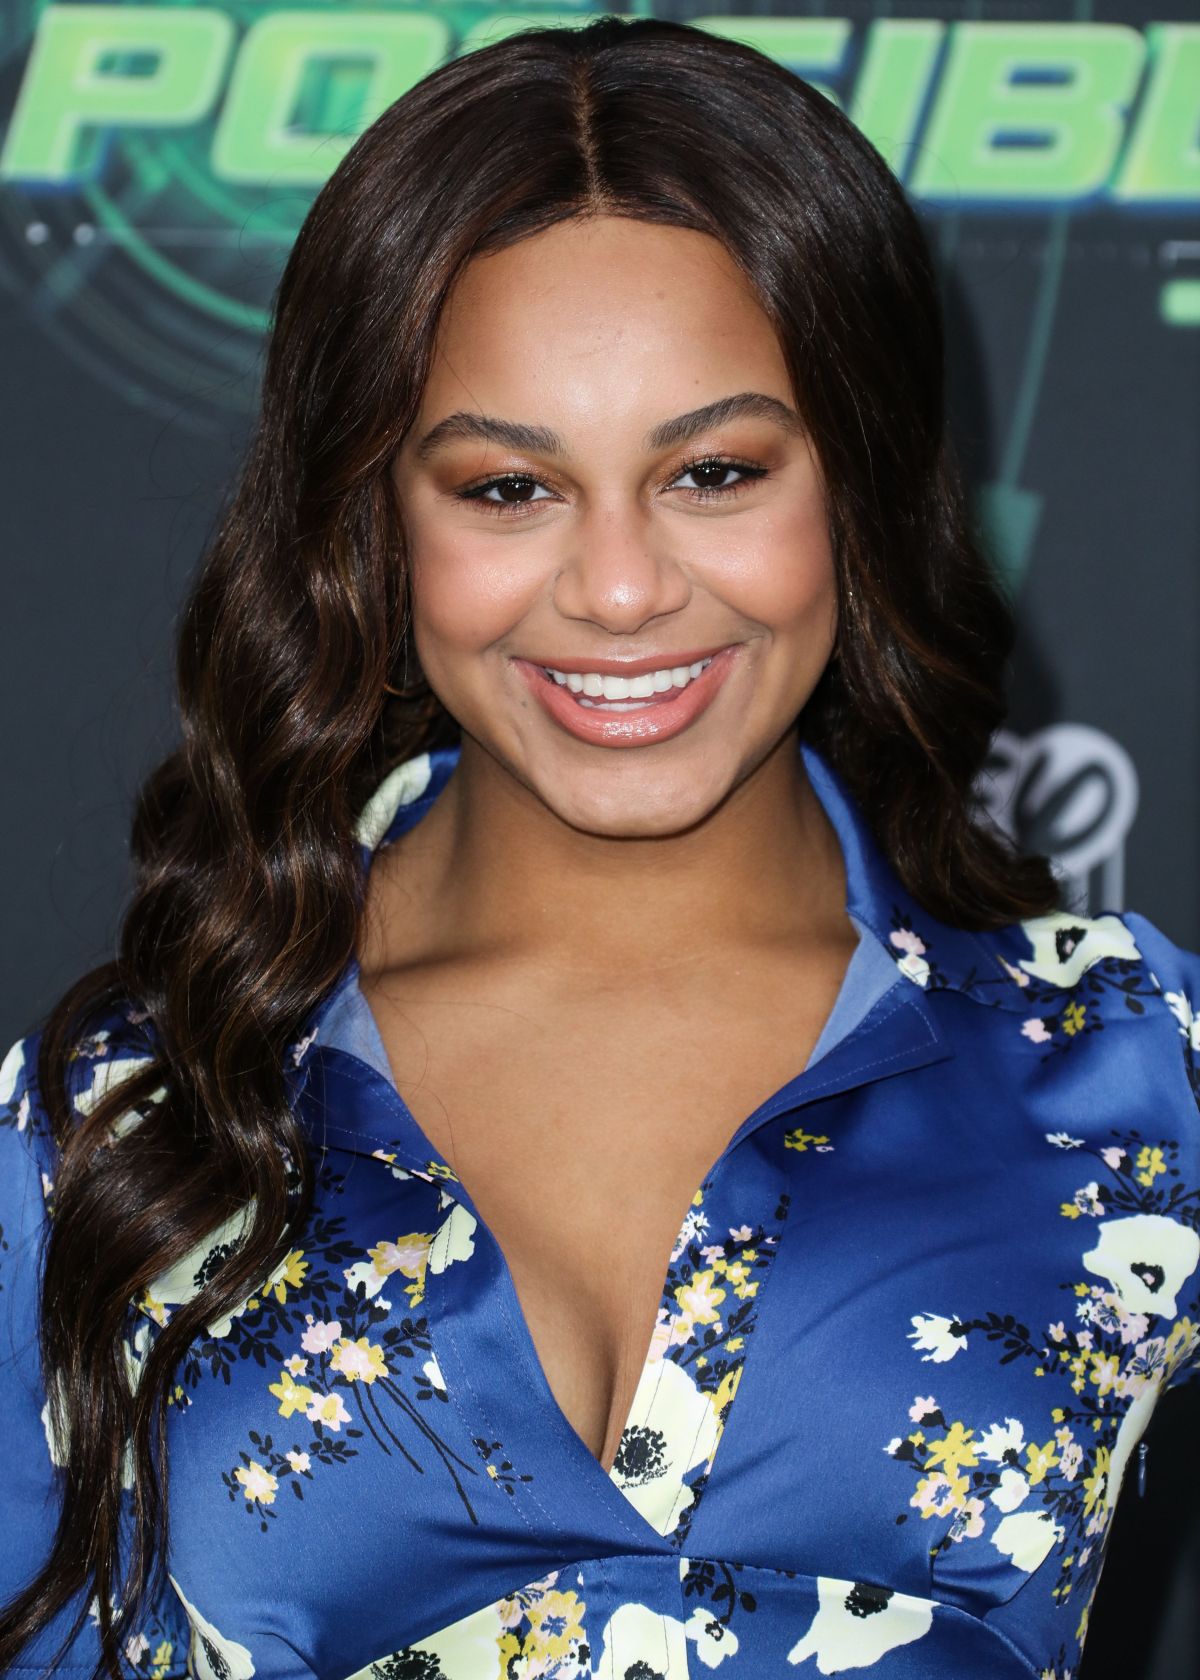 NIA SIOUX at Kim Possible Premiere in Los Angeles 02/12/2019 – HawtCelebs